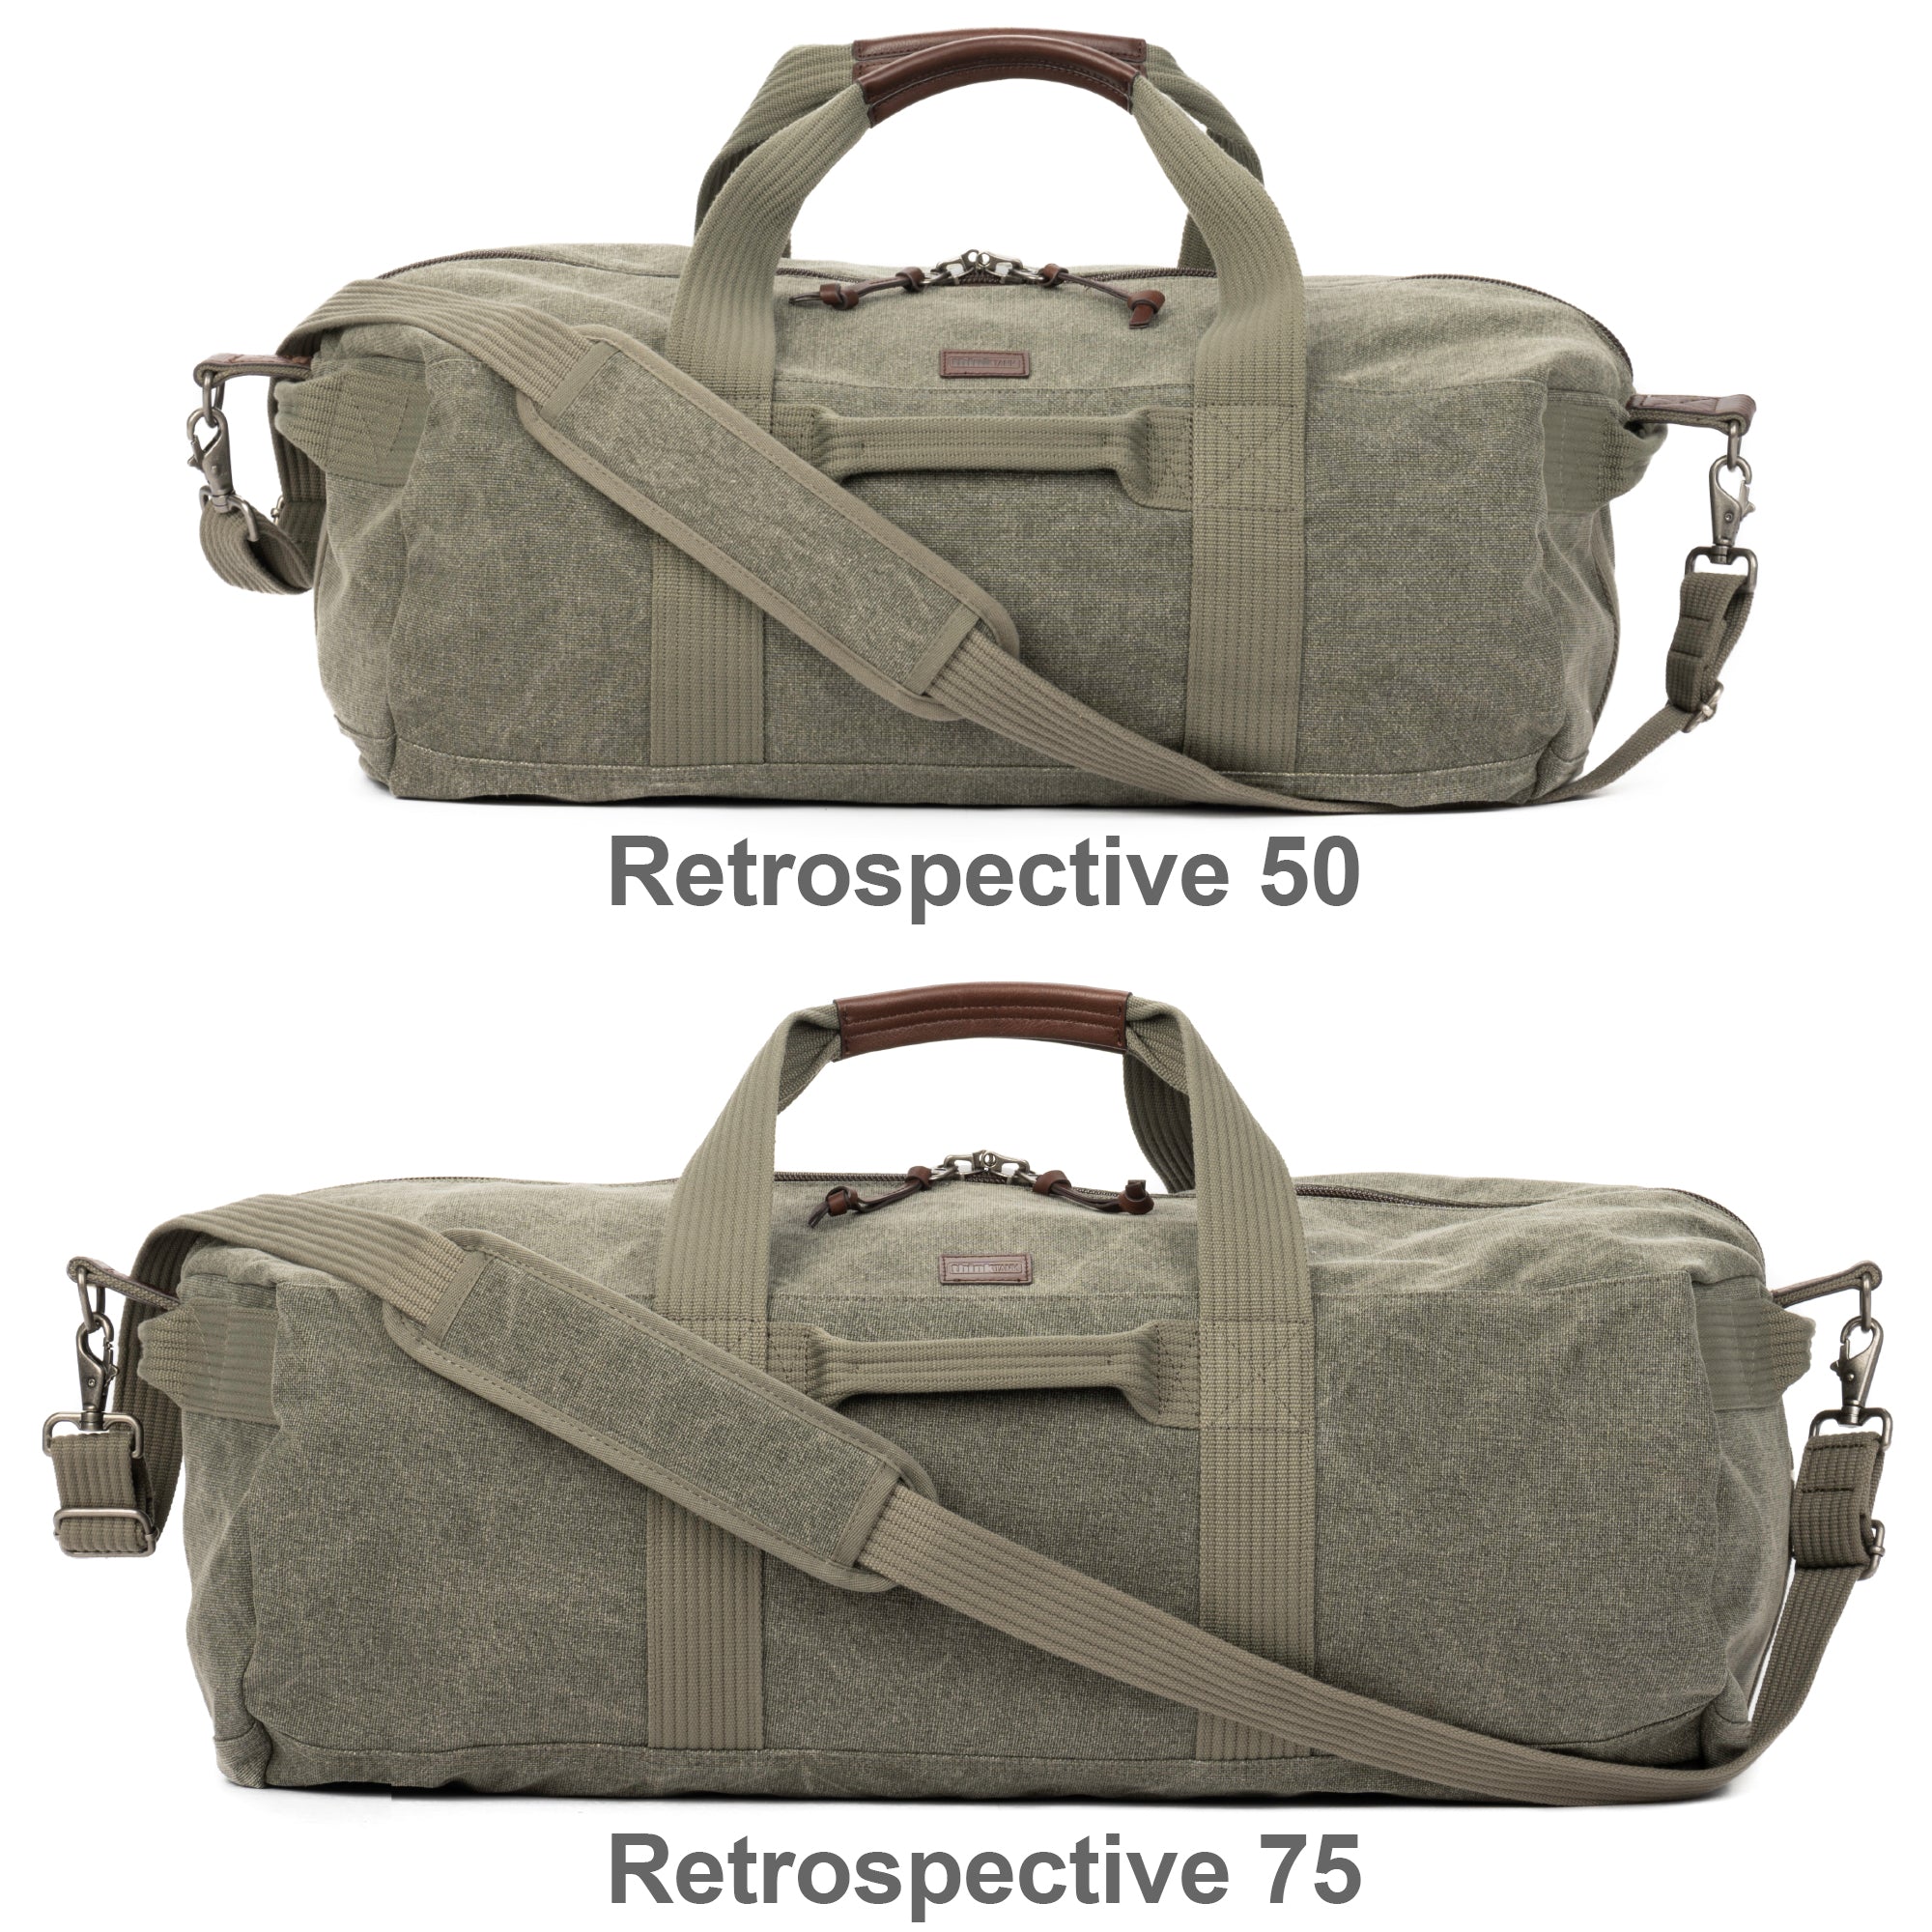 Retrospective® 50 Duffel Bag for travel, sports, and adventure